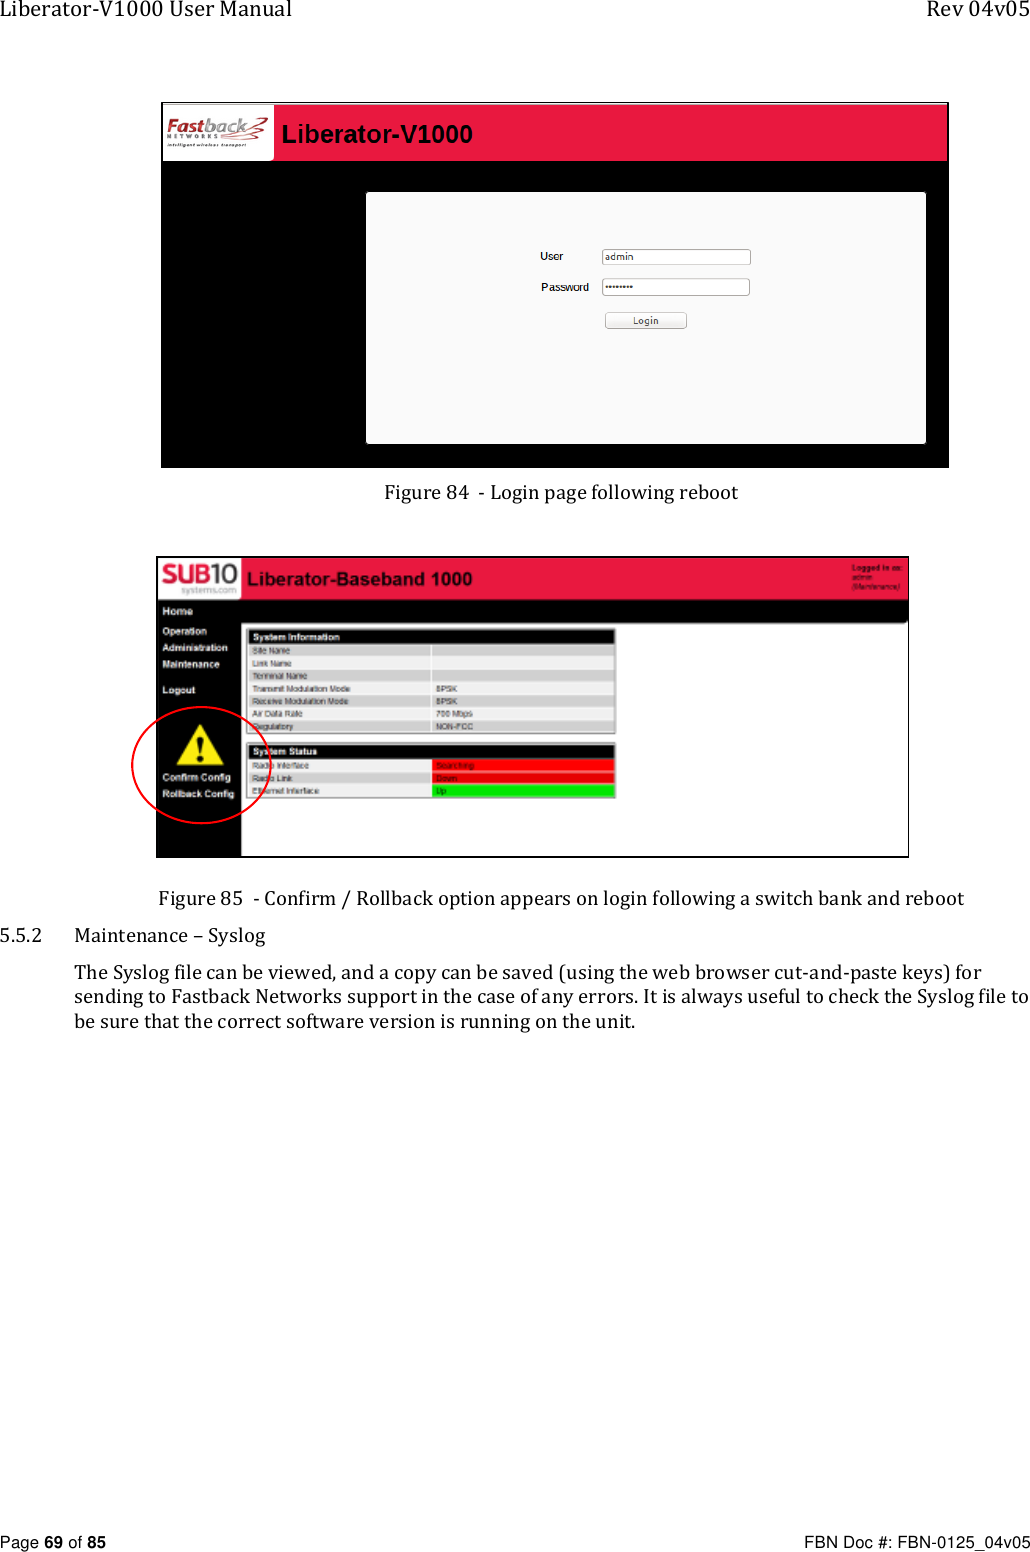 Liberator-V1000 User Manual  Rev 04v05     Page 69 of 85   FBN Doc #: FBN-0125_04v05  Figure 84  - Login page following reboot           Figure 85  - Confirm / Rollback option appears on login following a switch bank and reboot 5.5.2 Maintenance – Syslog The Syslog file can be viewed, and a copy can be saved (using the web browser cut-and-paste keys) for sending to Fastback Networks support in the case of any errors. It is always useful to check the Syslog file to be sure that the correct software version is running on the unit. 